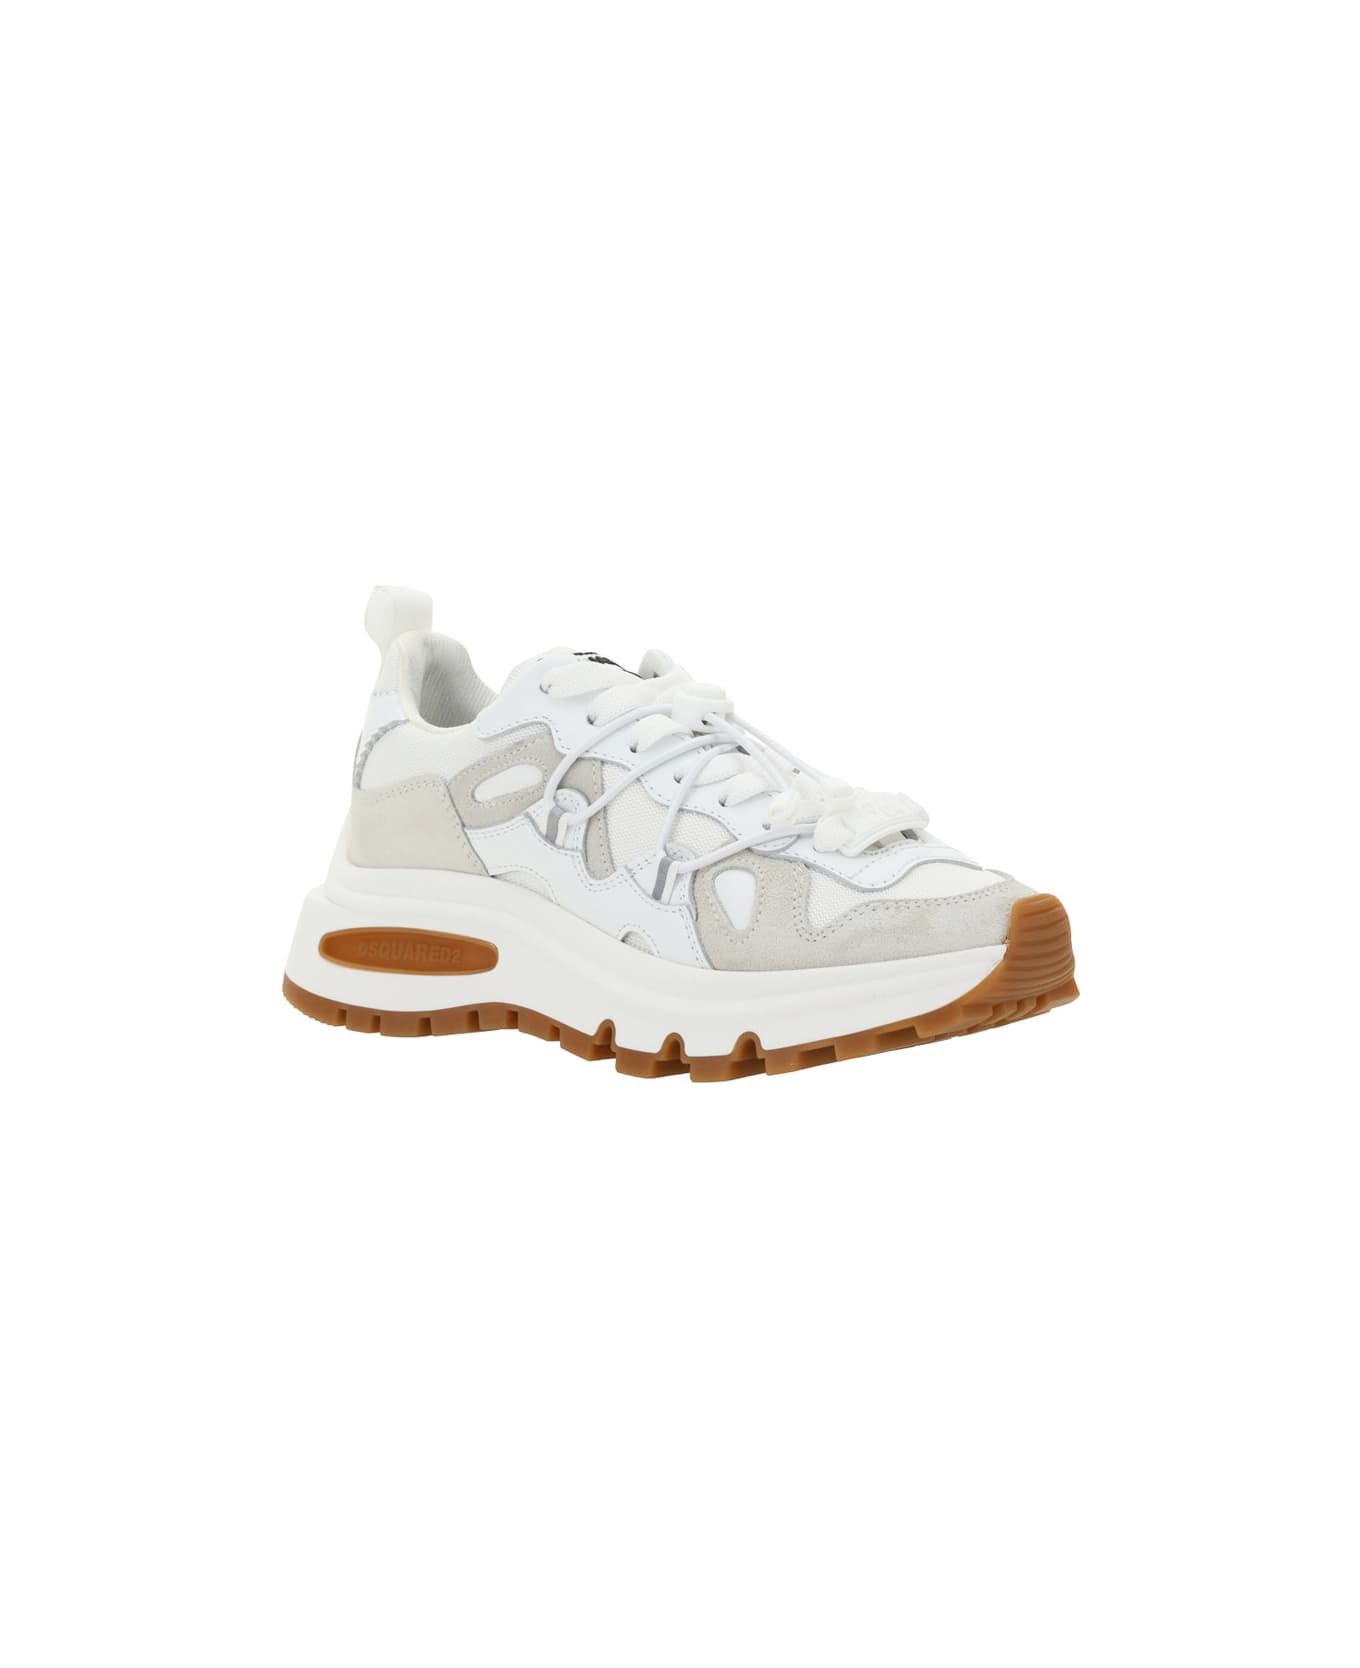 Dsquared2 Run Ds2 Sneakers - White スニーカー